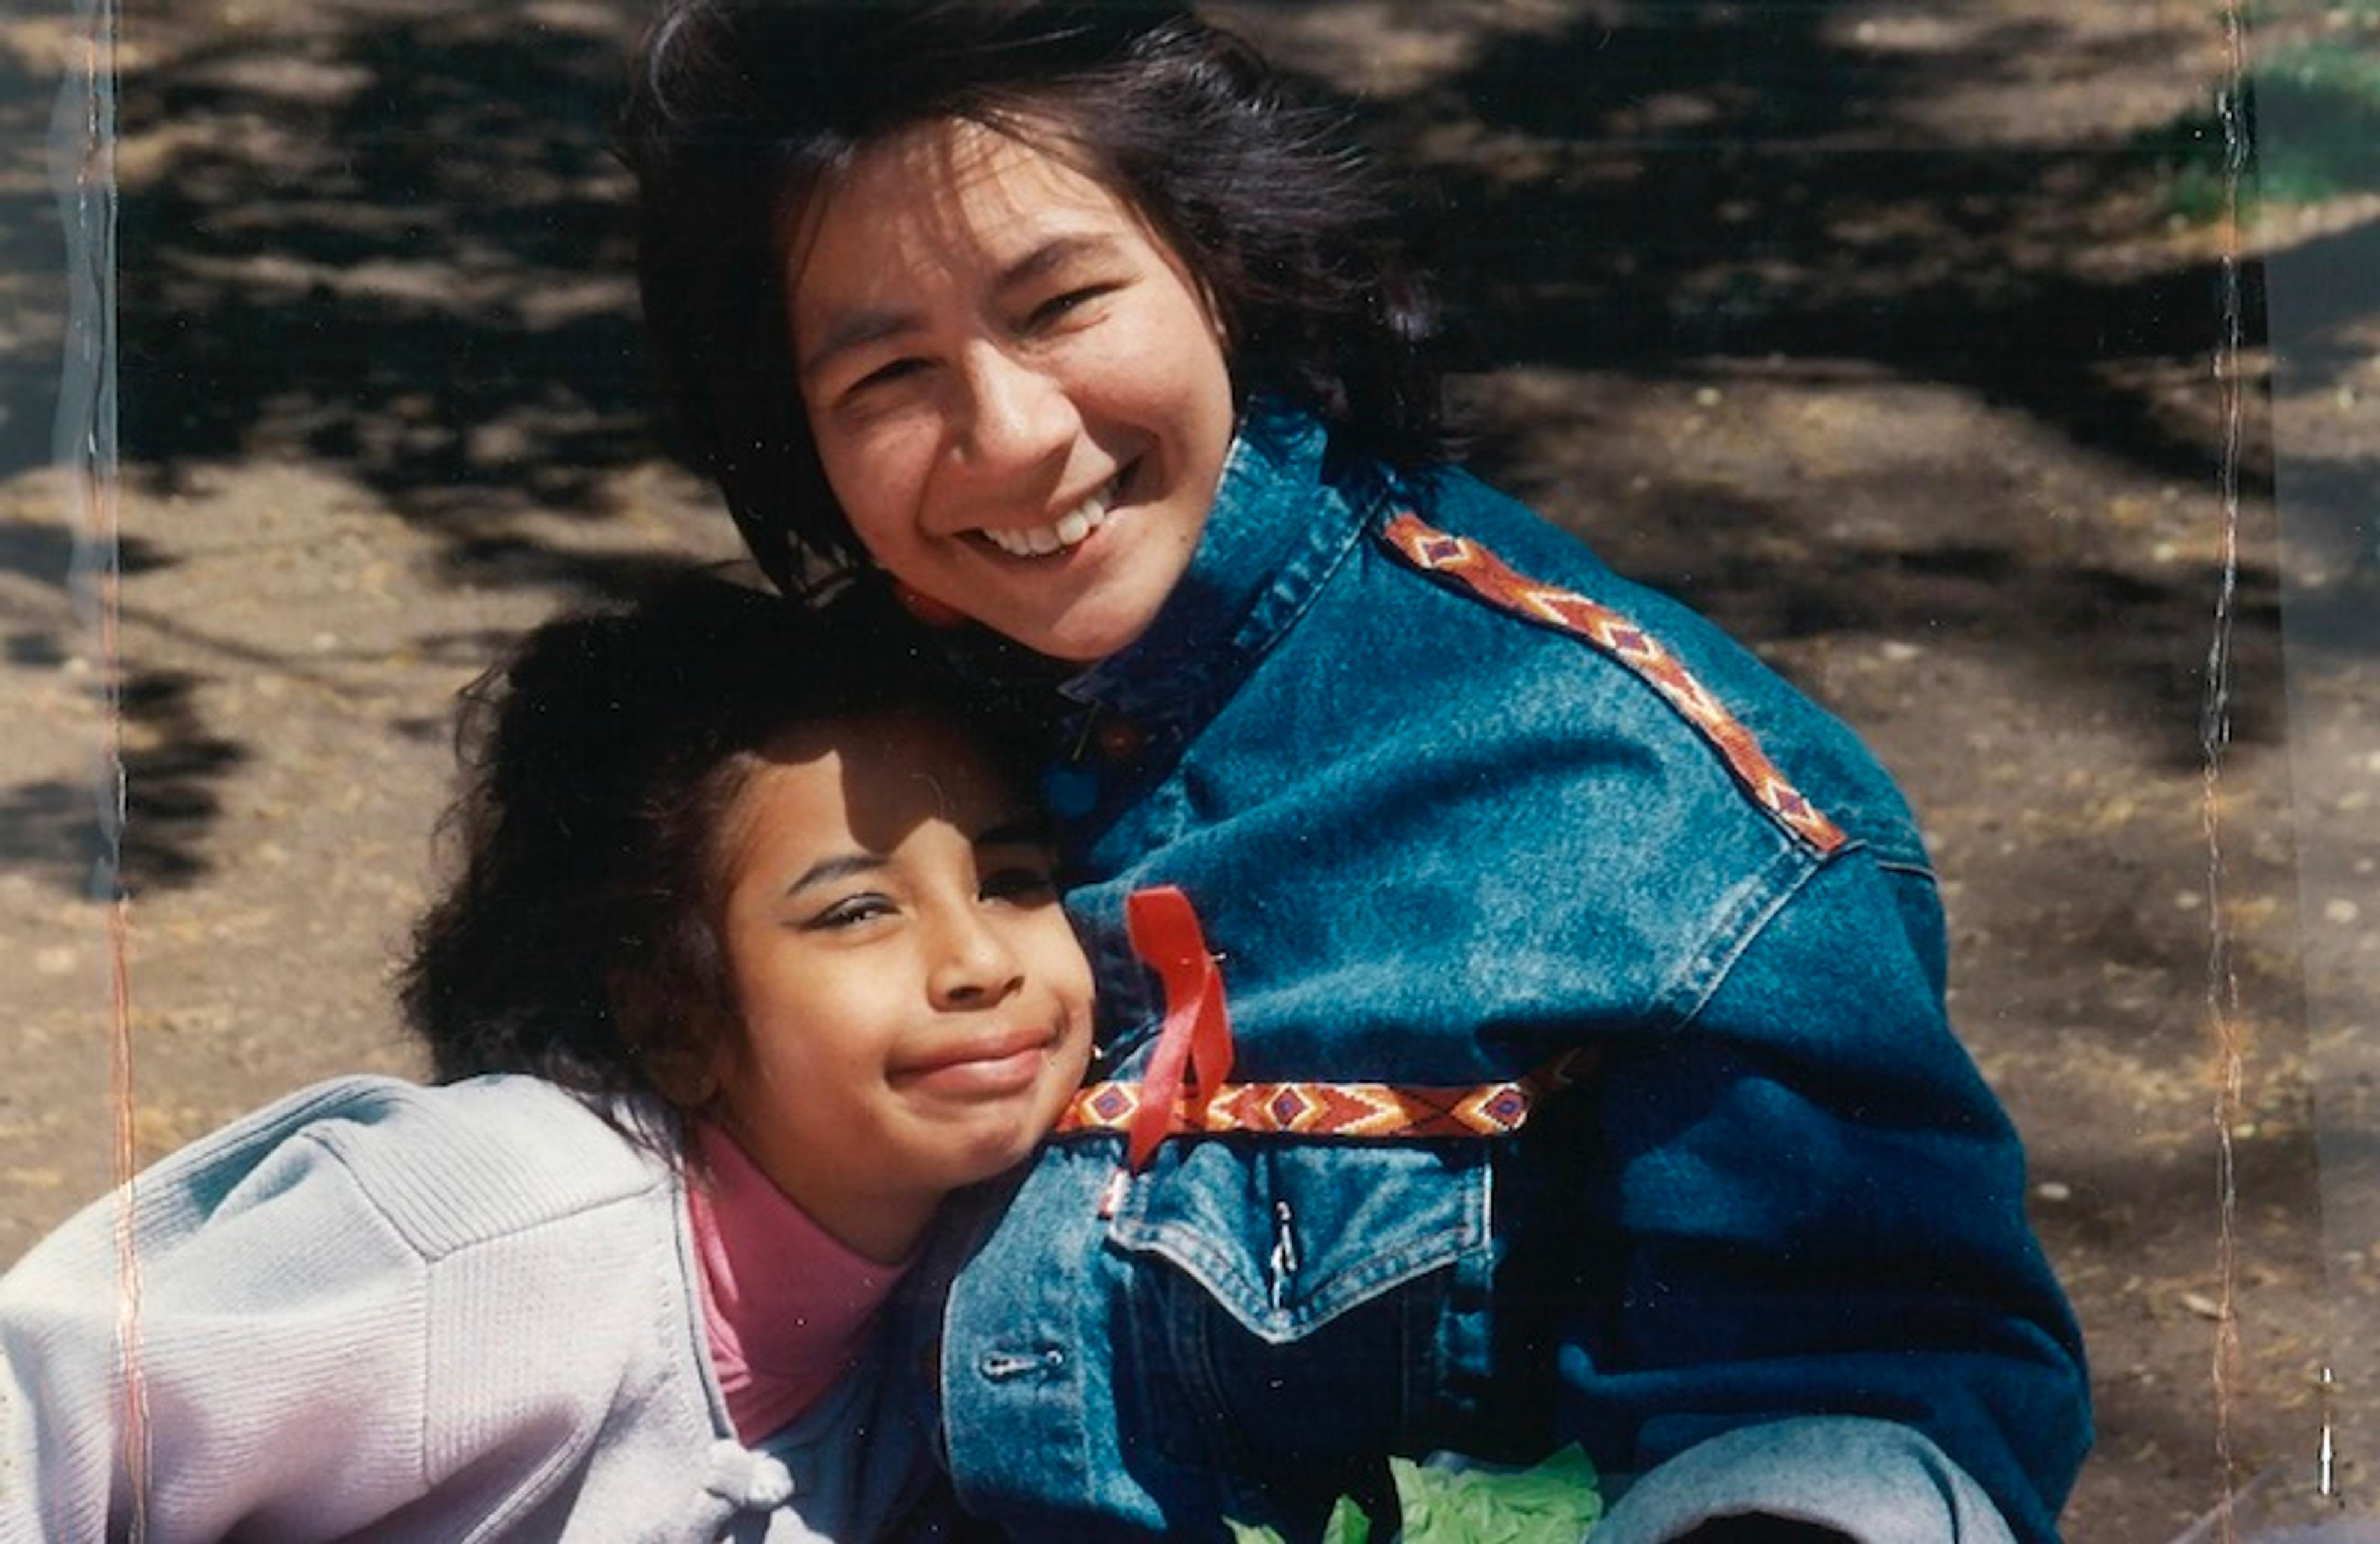 A photograph of a child hugging an adult wearing a denim jacket